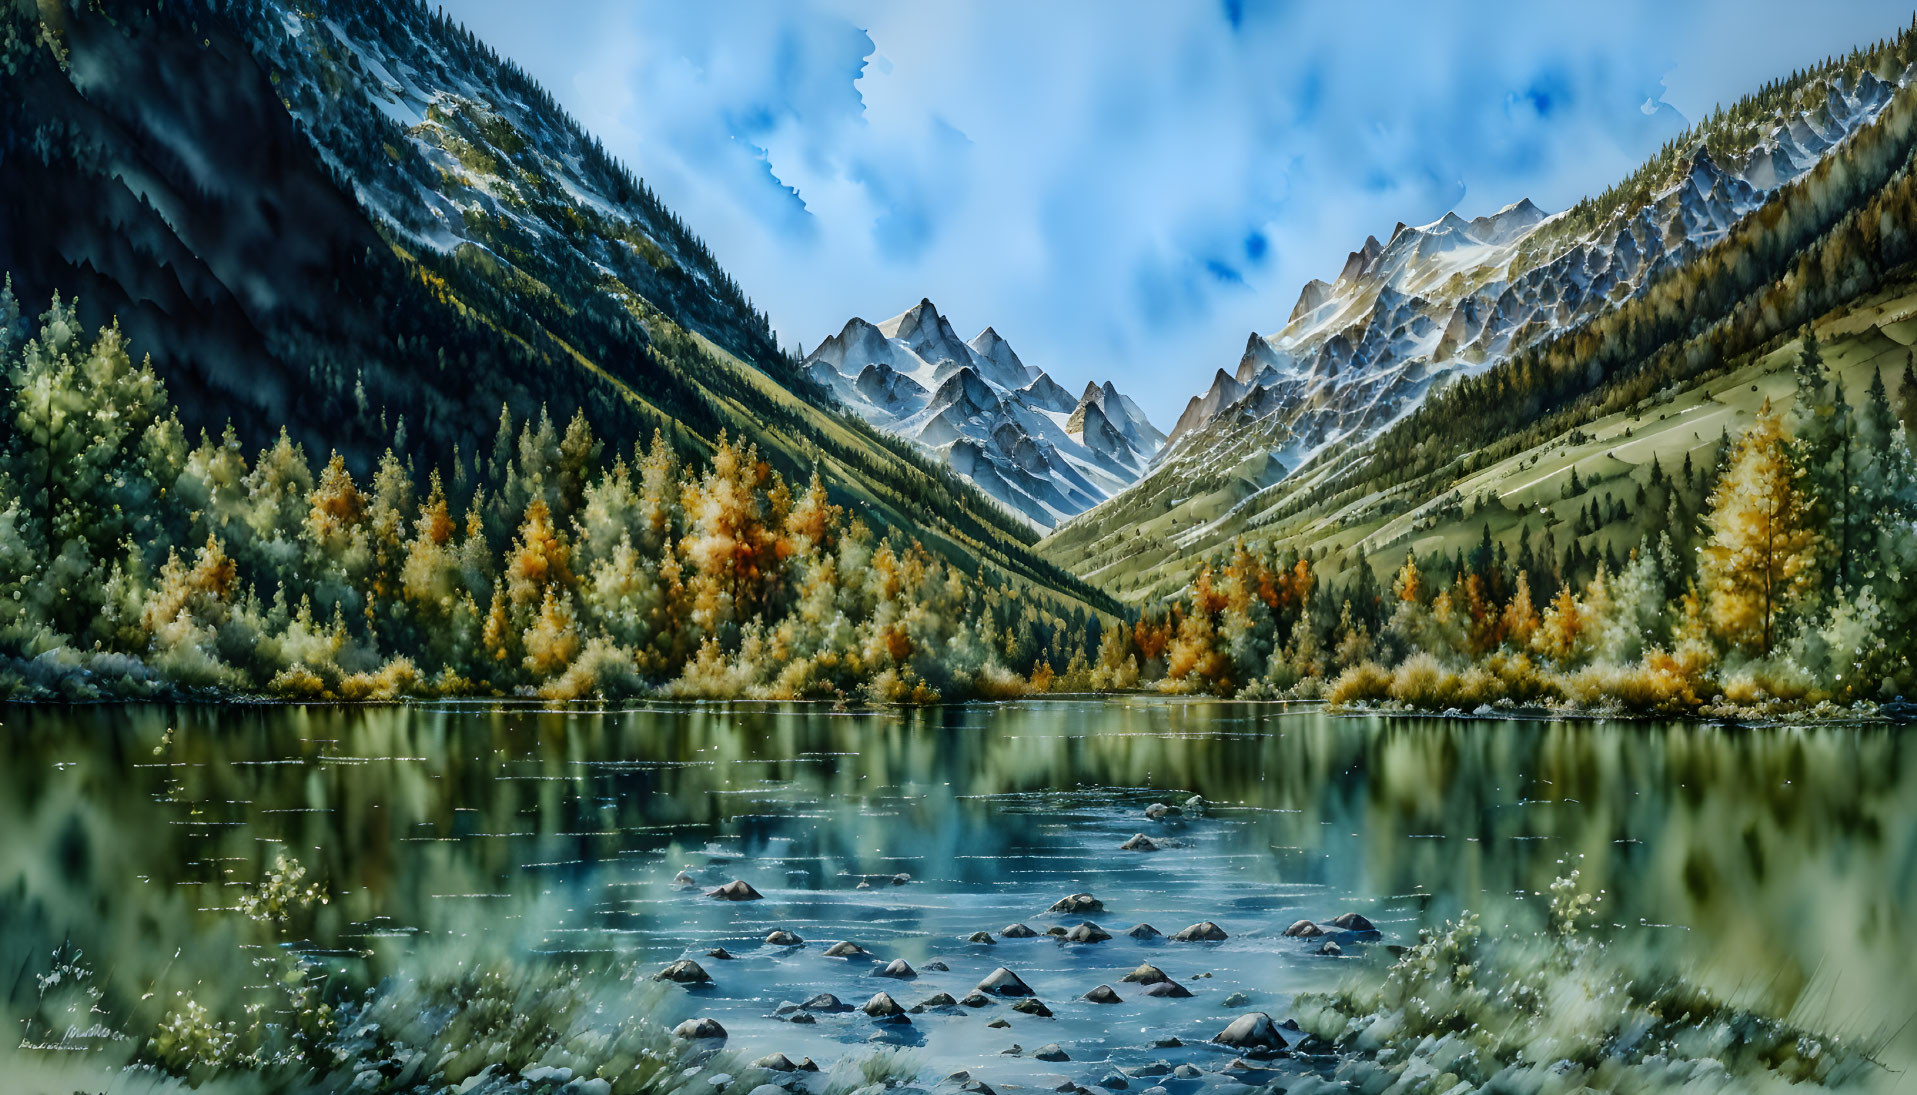 Tranquil mountain landscape with reflective lake and autumnal forested slopes